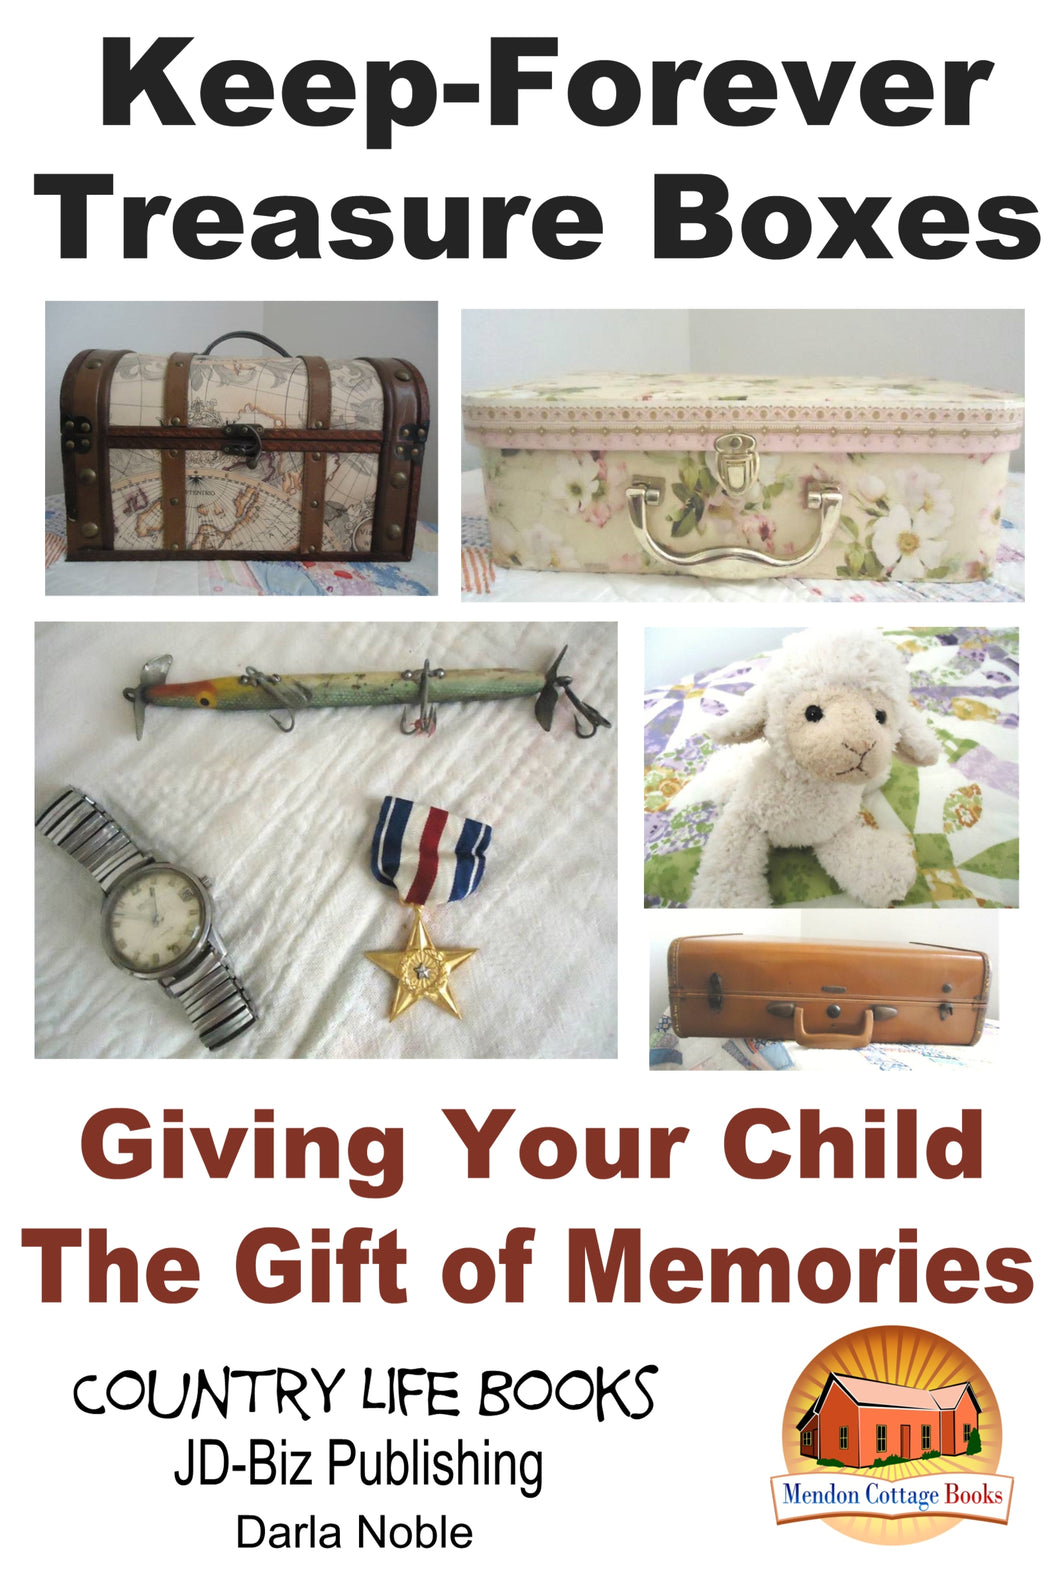 Keep-Forever Treasure Boxes - Giving Your Child the Gift of Memories